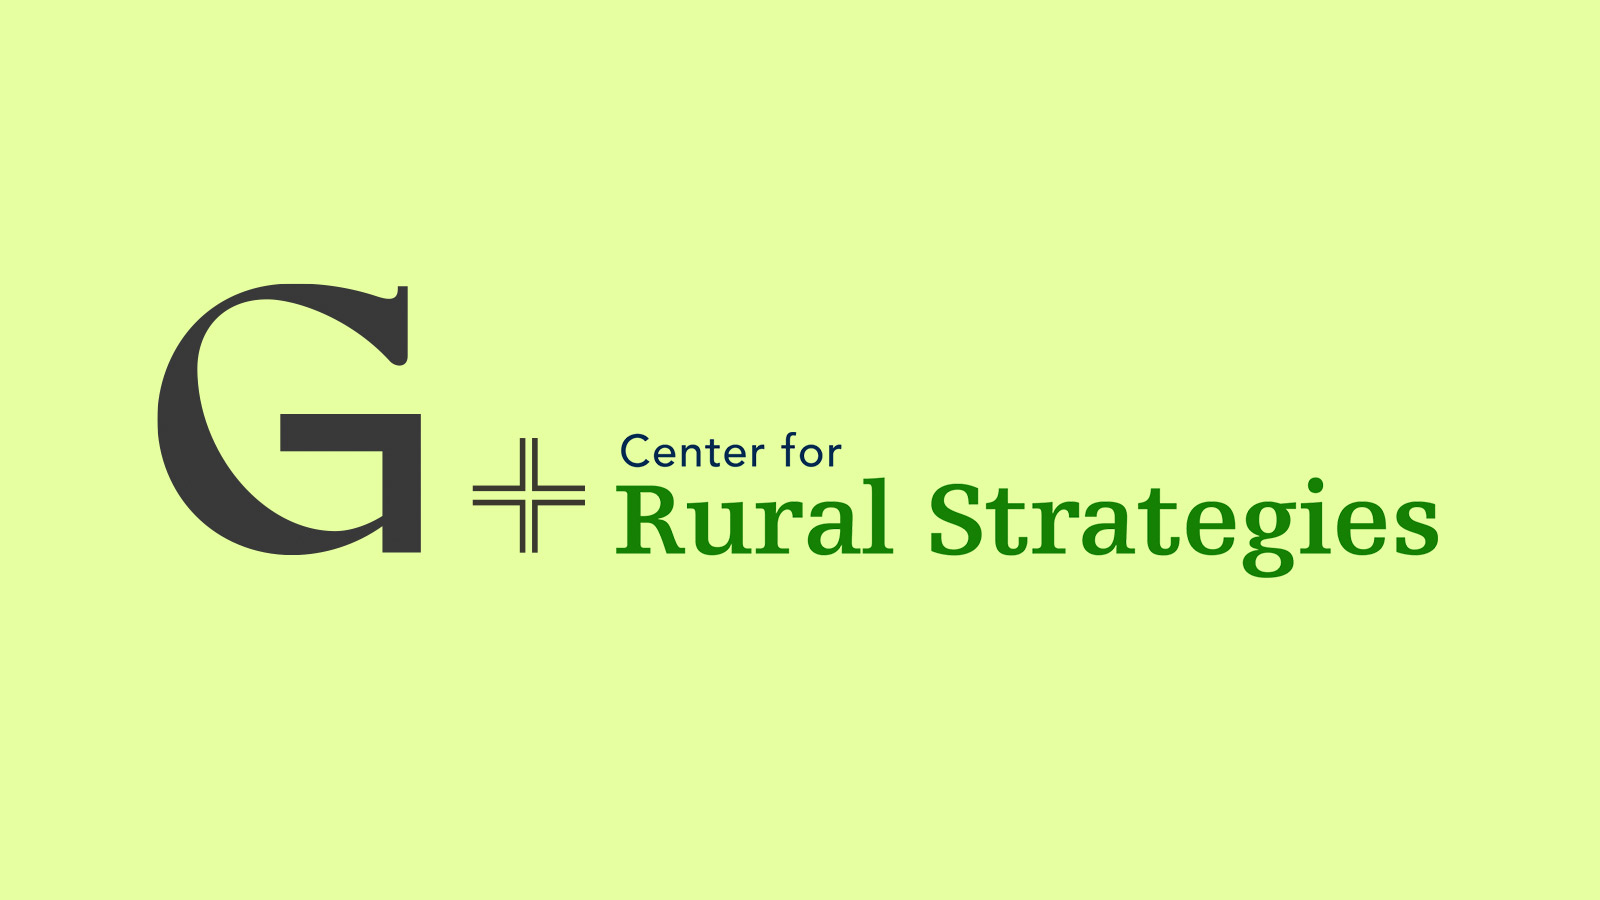 Grist and the Center for Rural Strategies